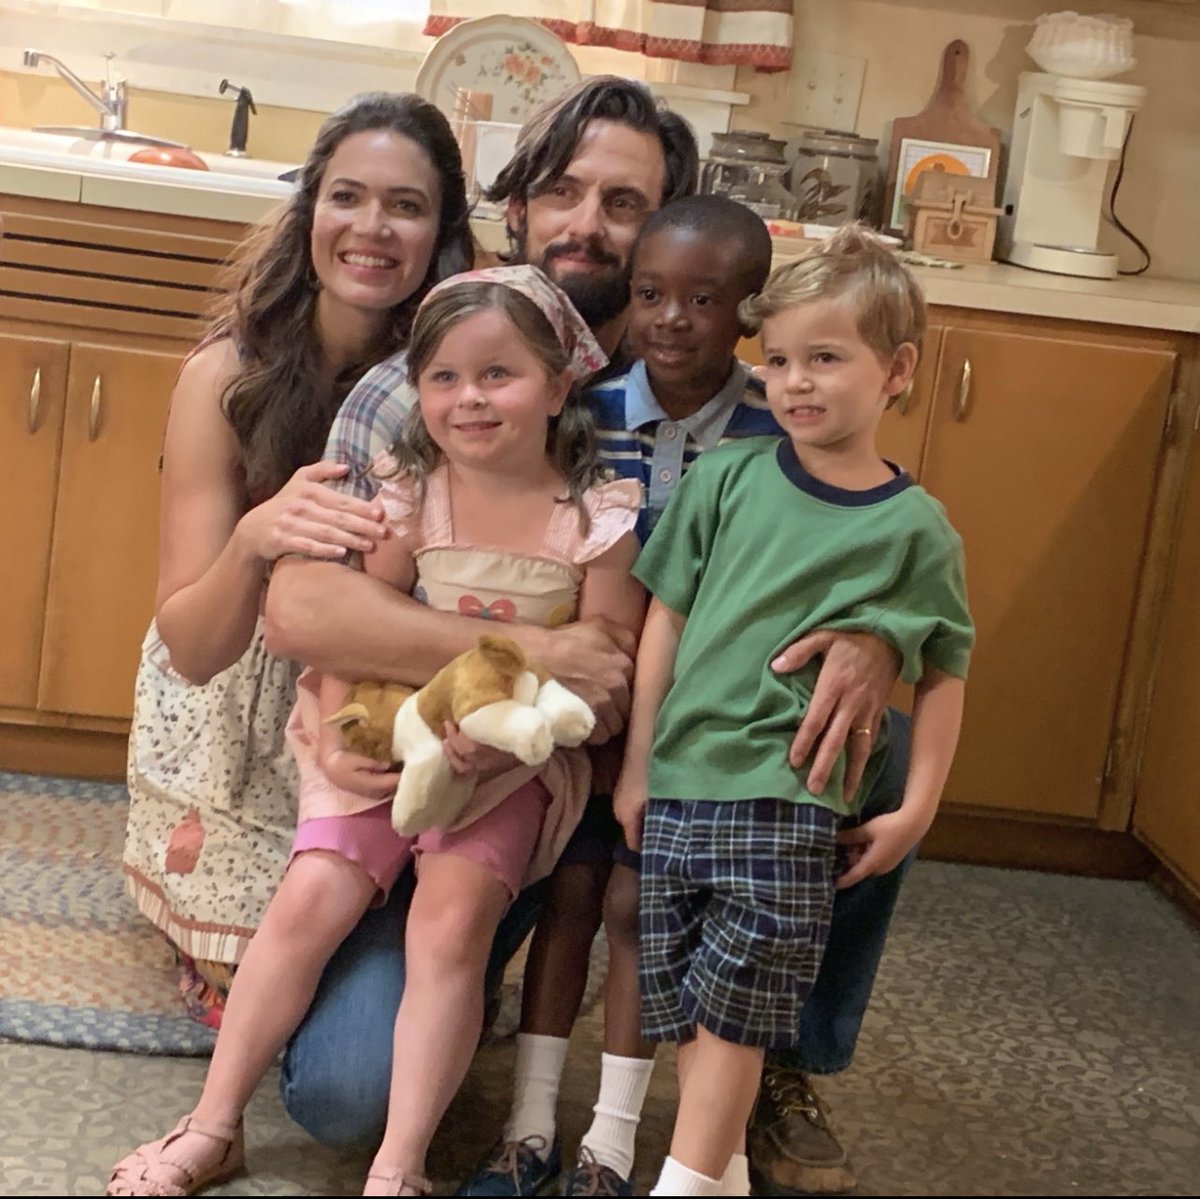 Our first family photo from 3yrs ago! ❤️ u all!! #foreverfamily #nbcthisisus  #ThisIsUsFinalChapter #thisisus #nbc #mandymoore #MiloVentimiglia #bigthree #pearsonfamily